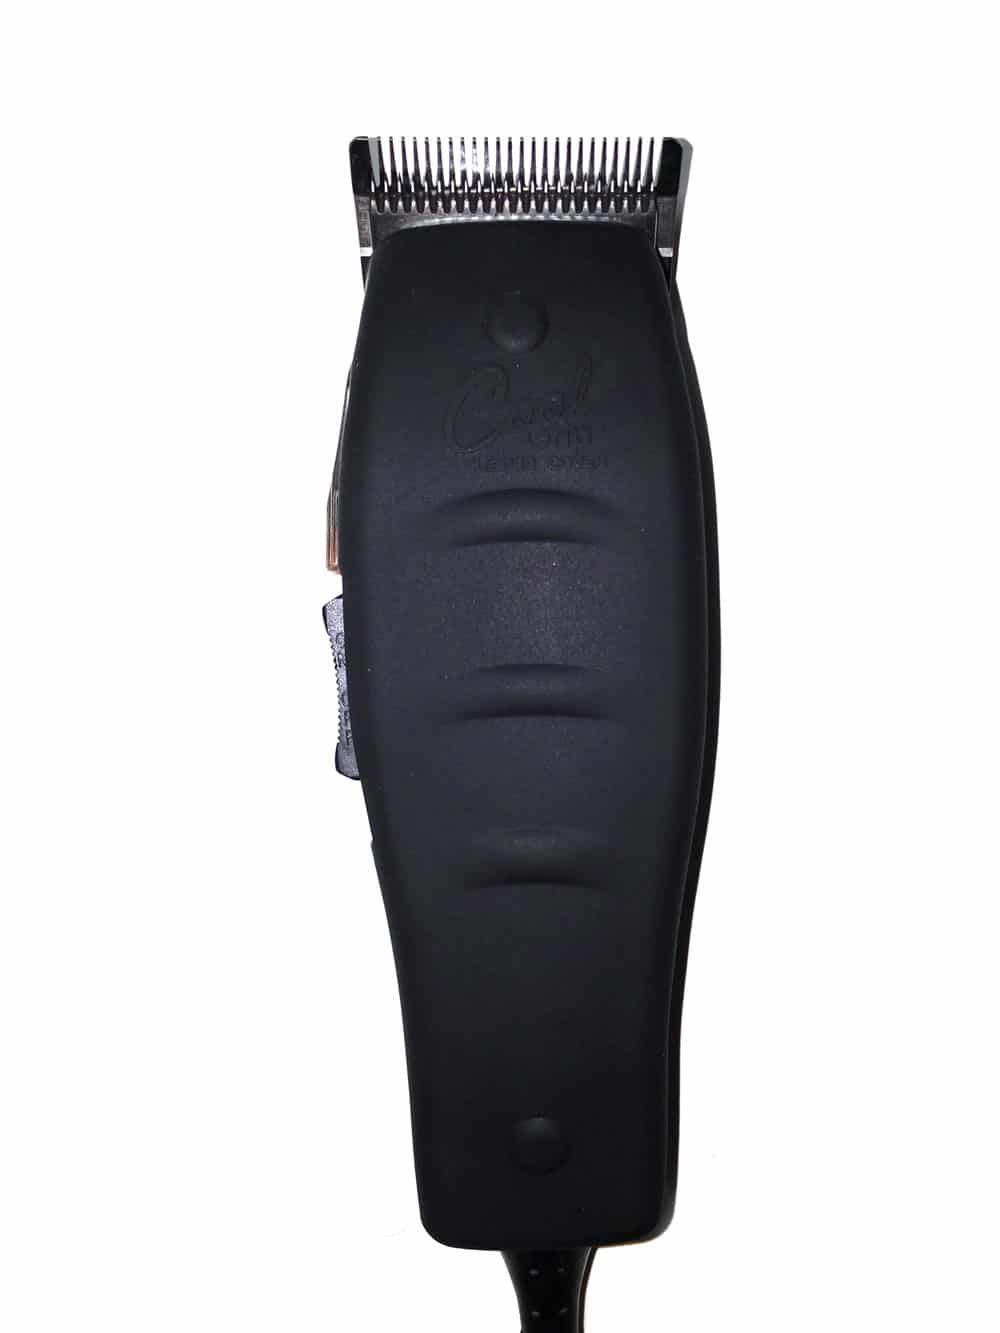 wahl clipper cover